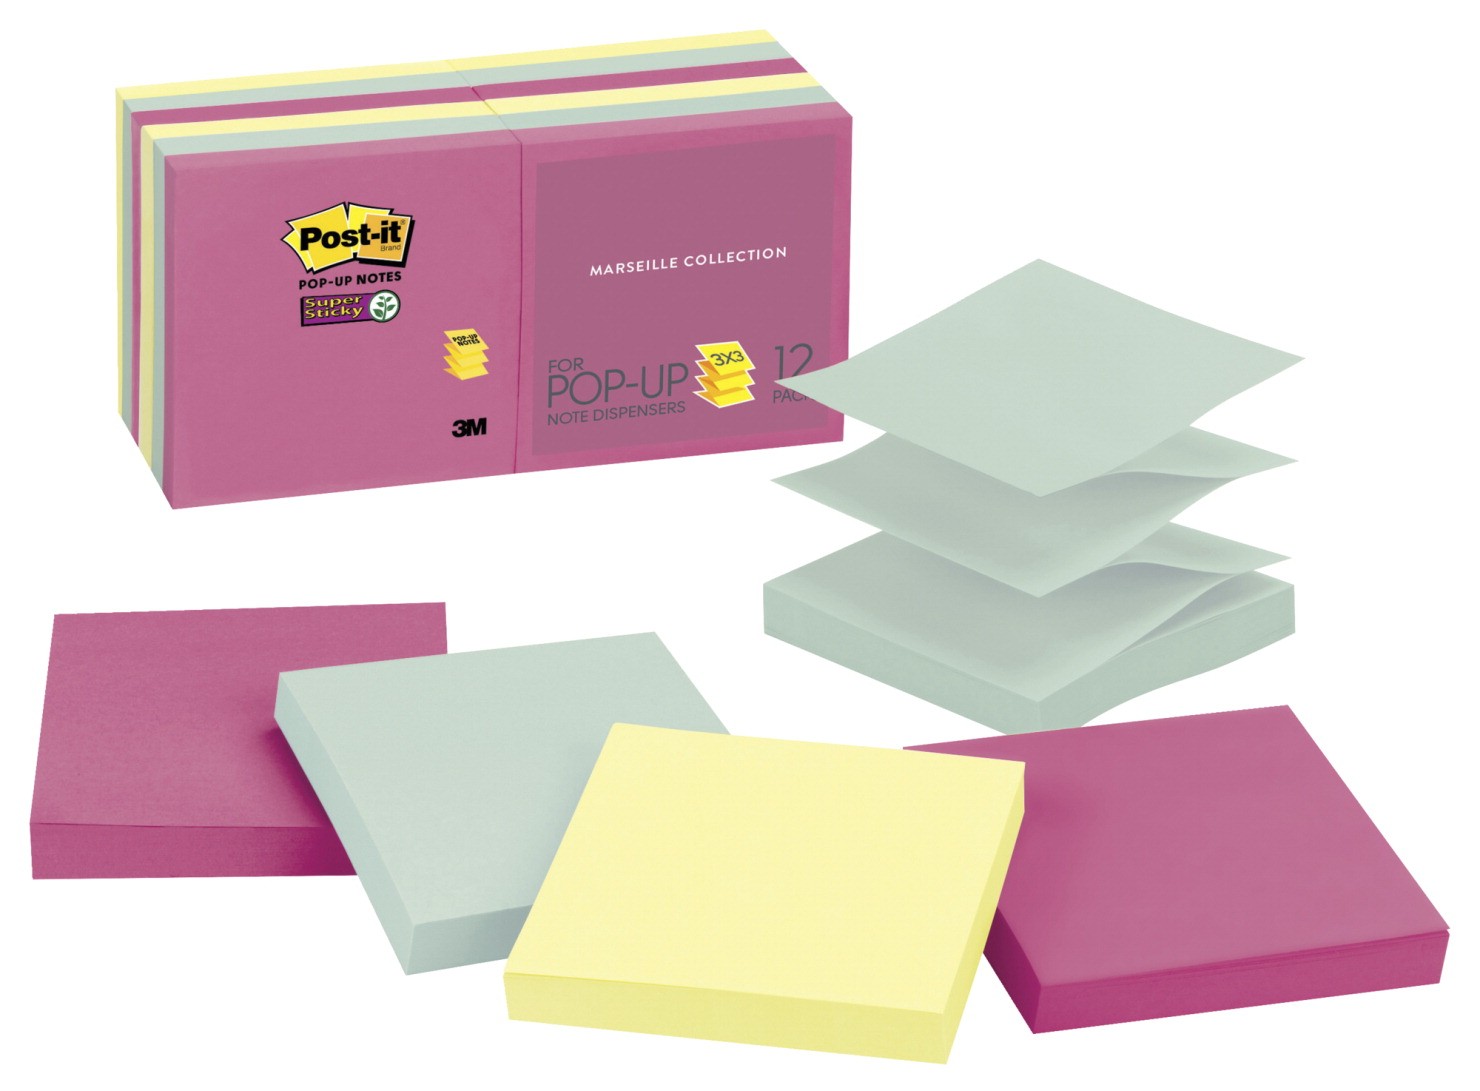 3 X 3 in, Post-it Pop-Up Original Notes, Marseille Colors, Pad of 100 Sheets, Pack of 12